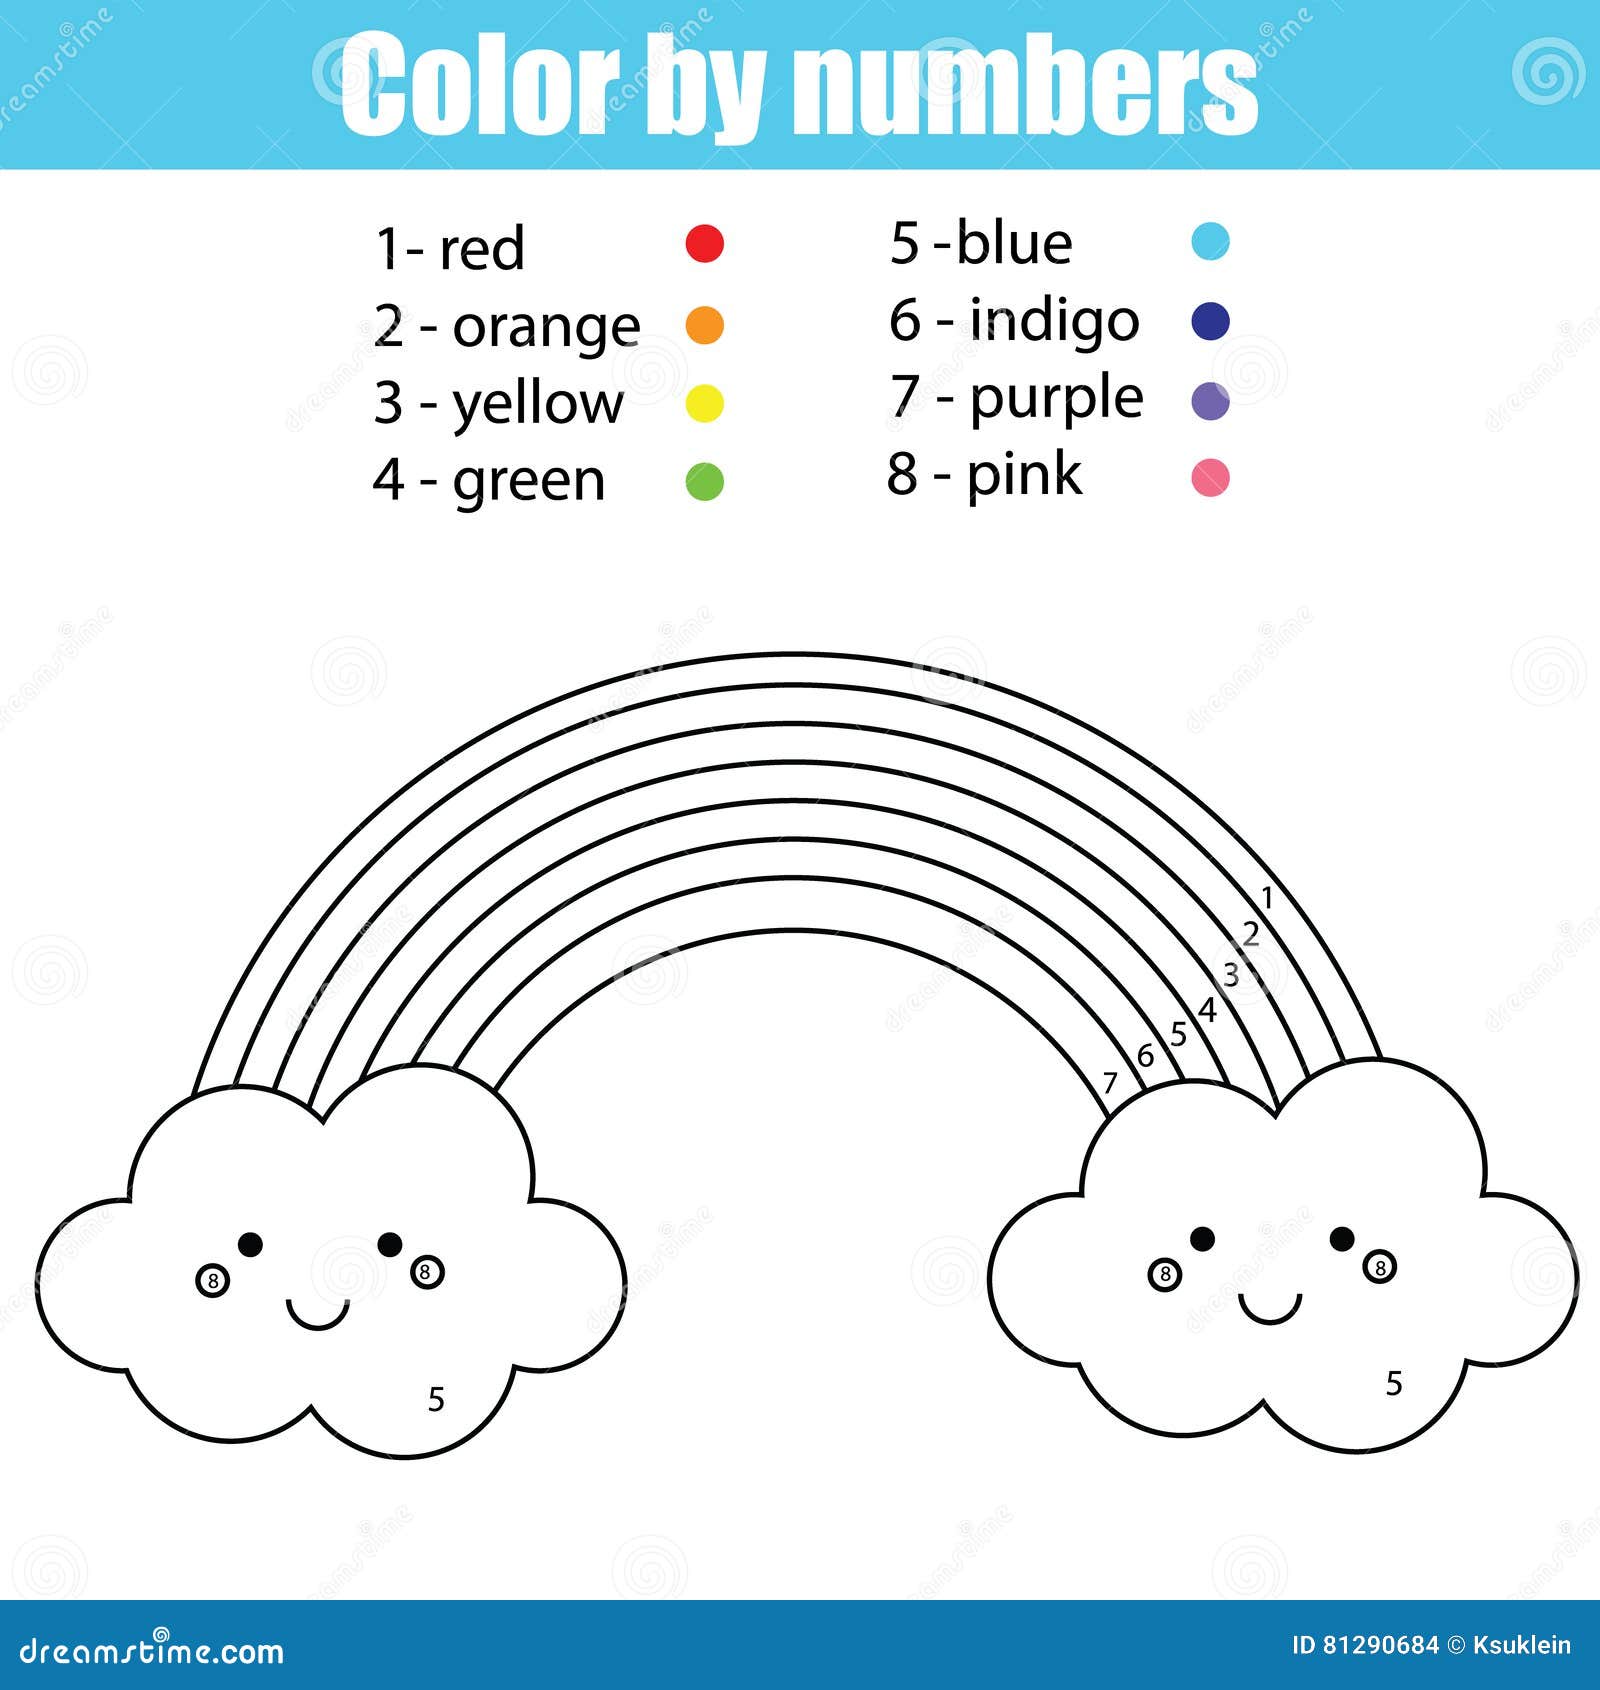 coloring-page-with-cute-kawaii-rainbow-color-by-numbers-stock-vector